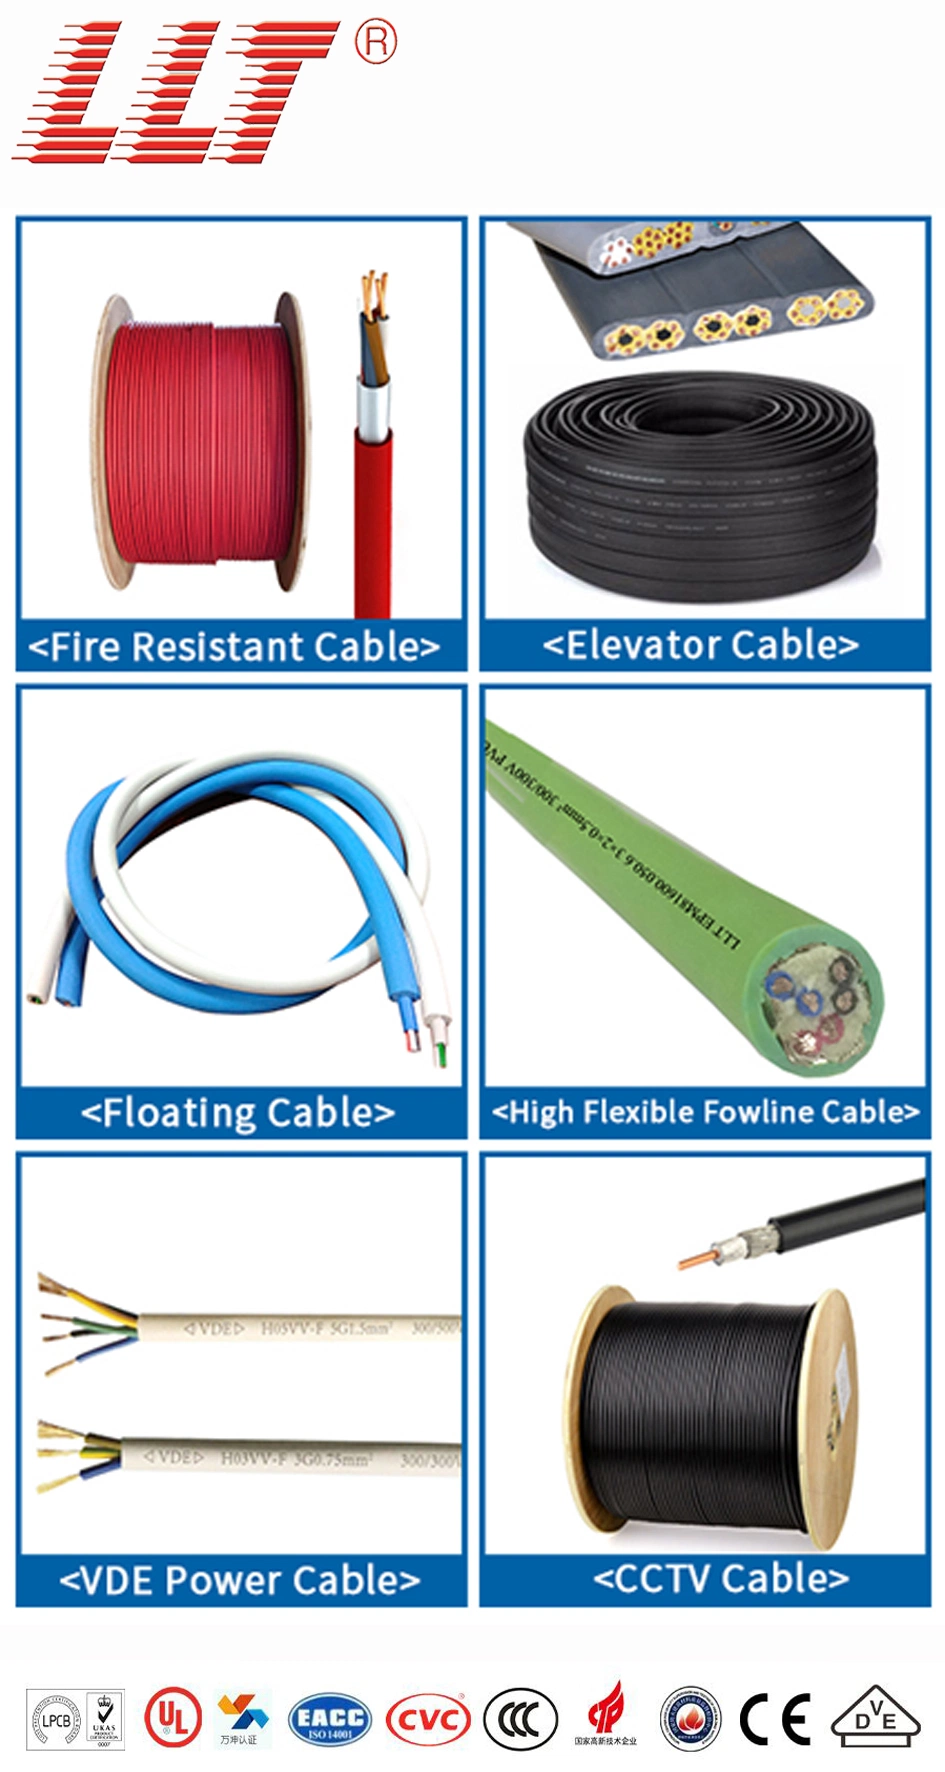 Flame Resistant Cable 2c 1.5mm pH30/120 BS Standard